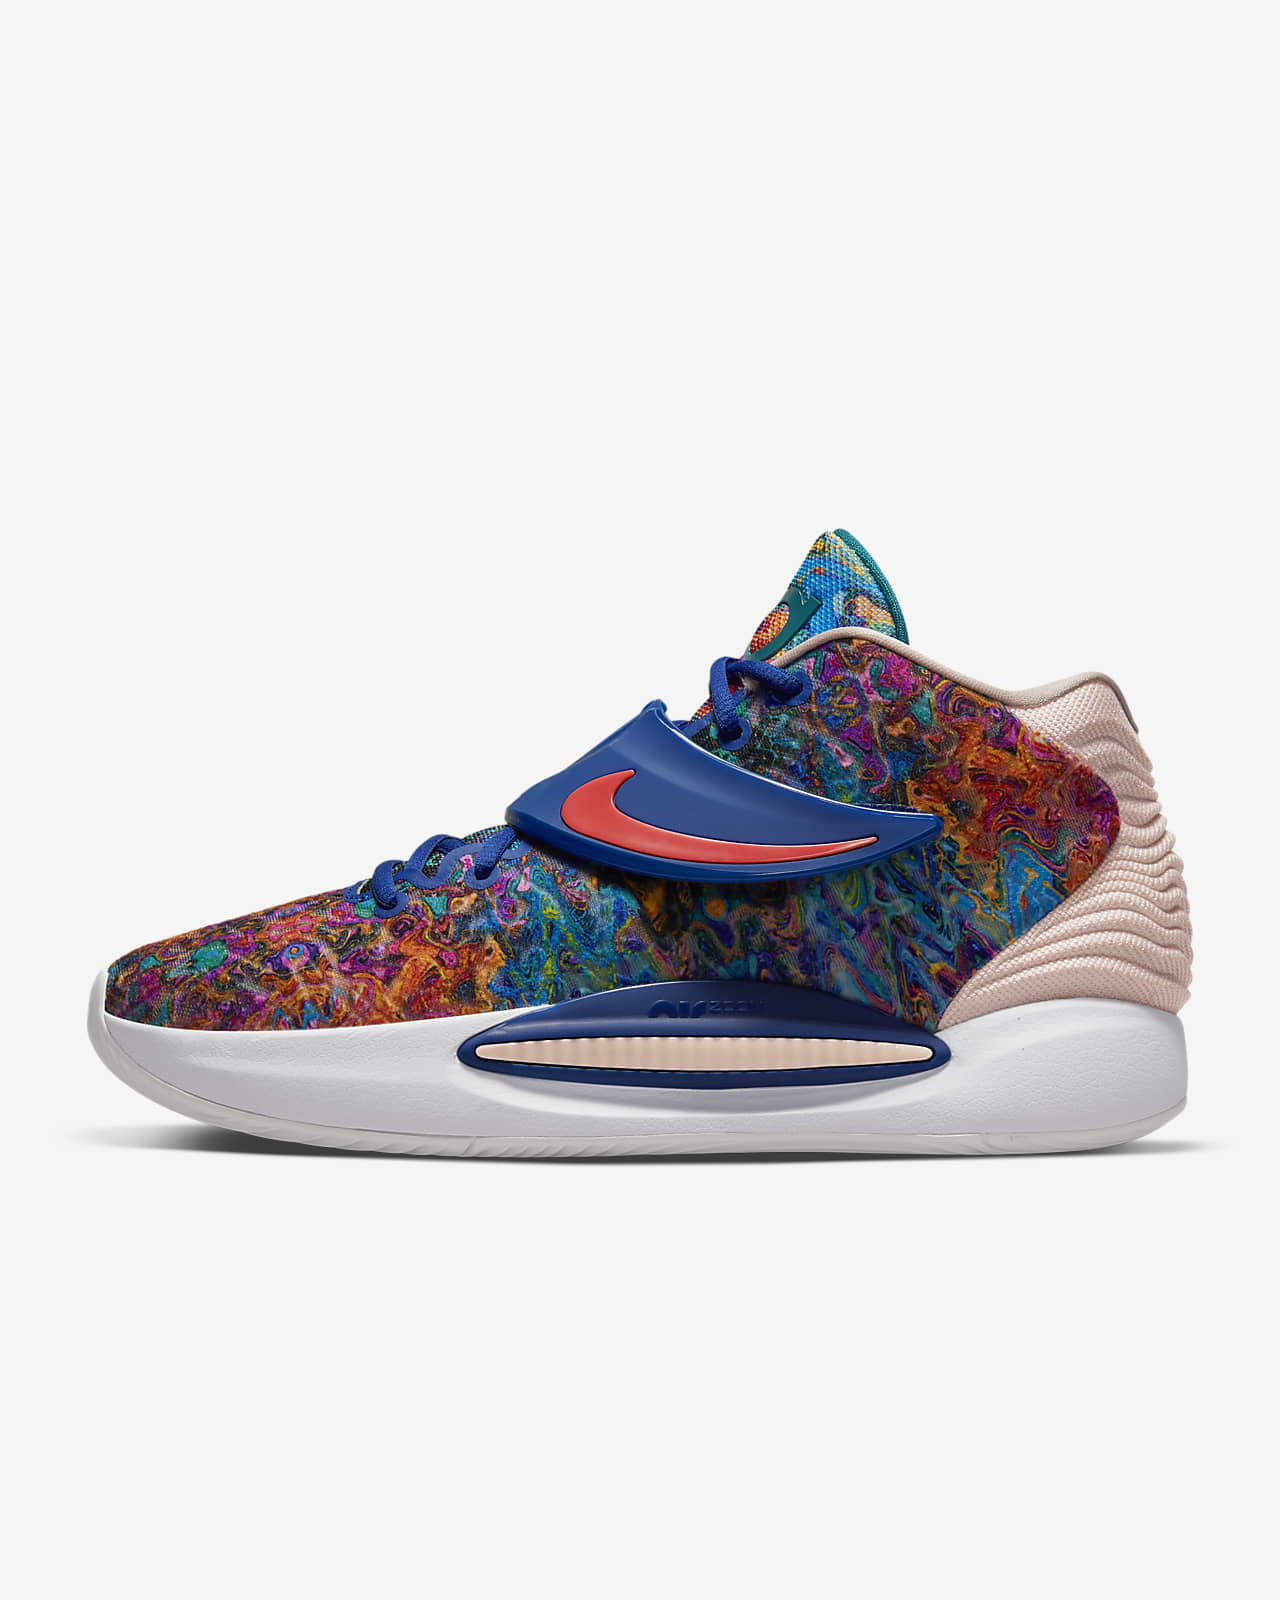 Nike KD 14 ‘Psychedelic’ .38 Free Shipping